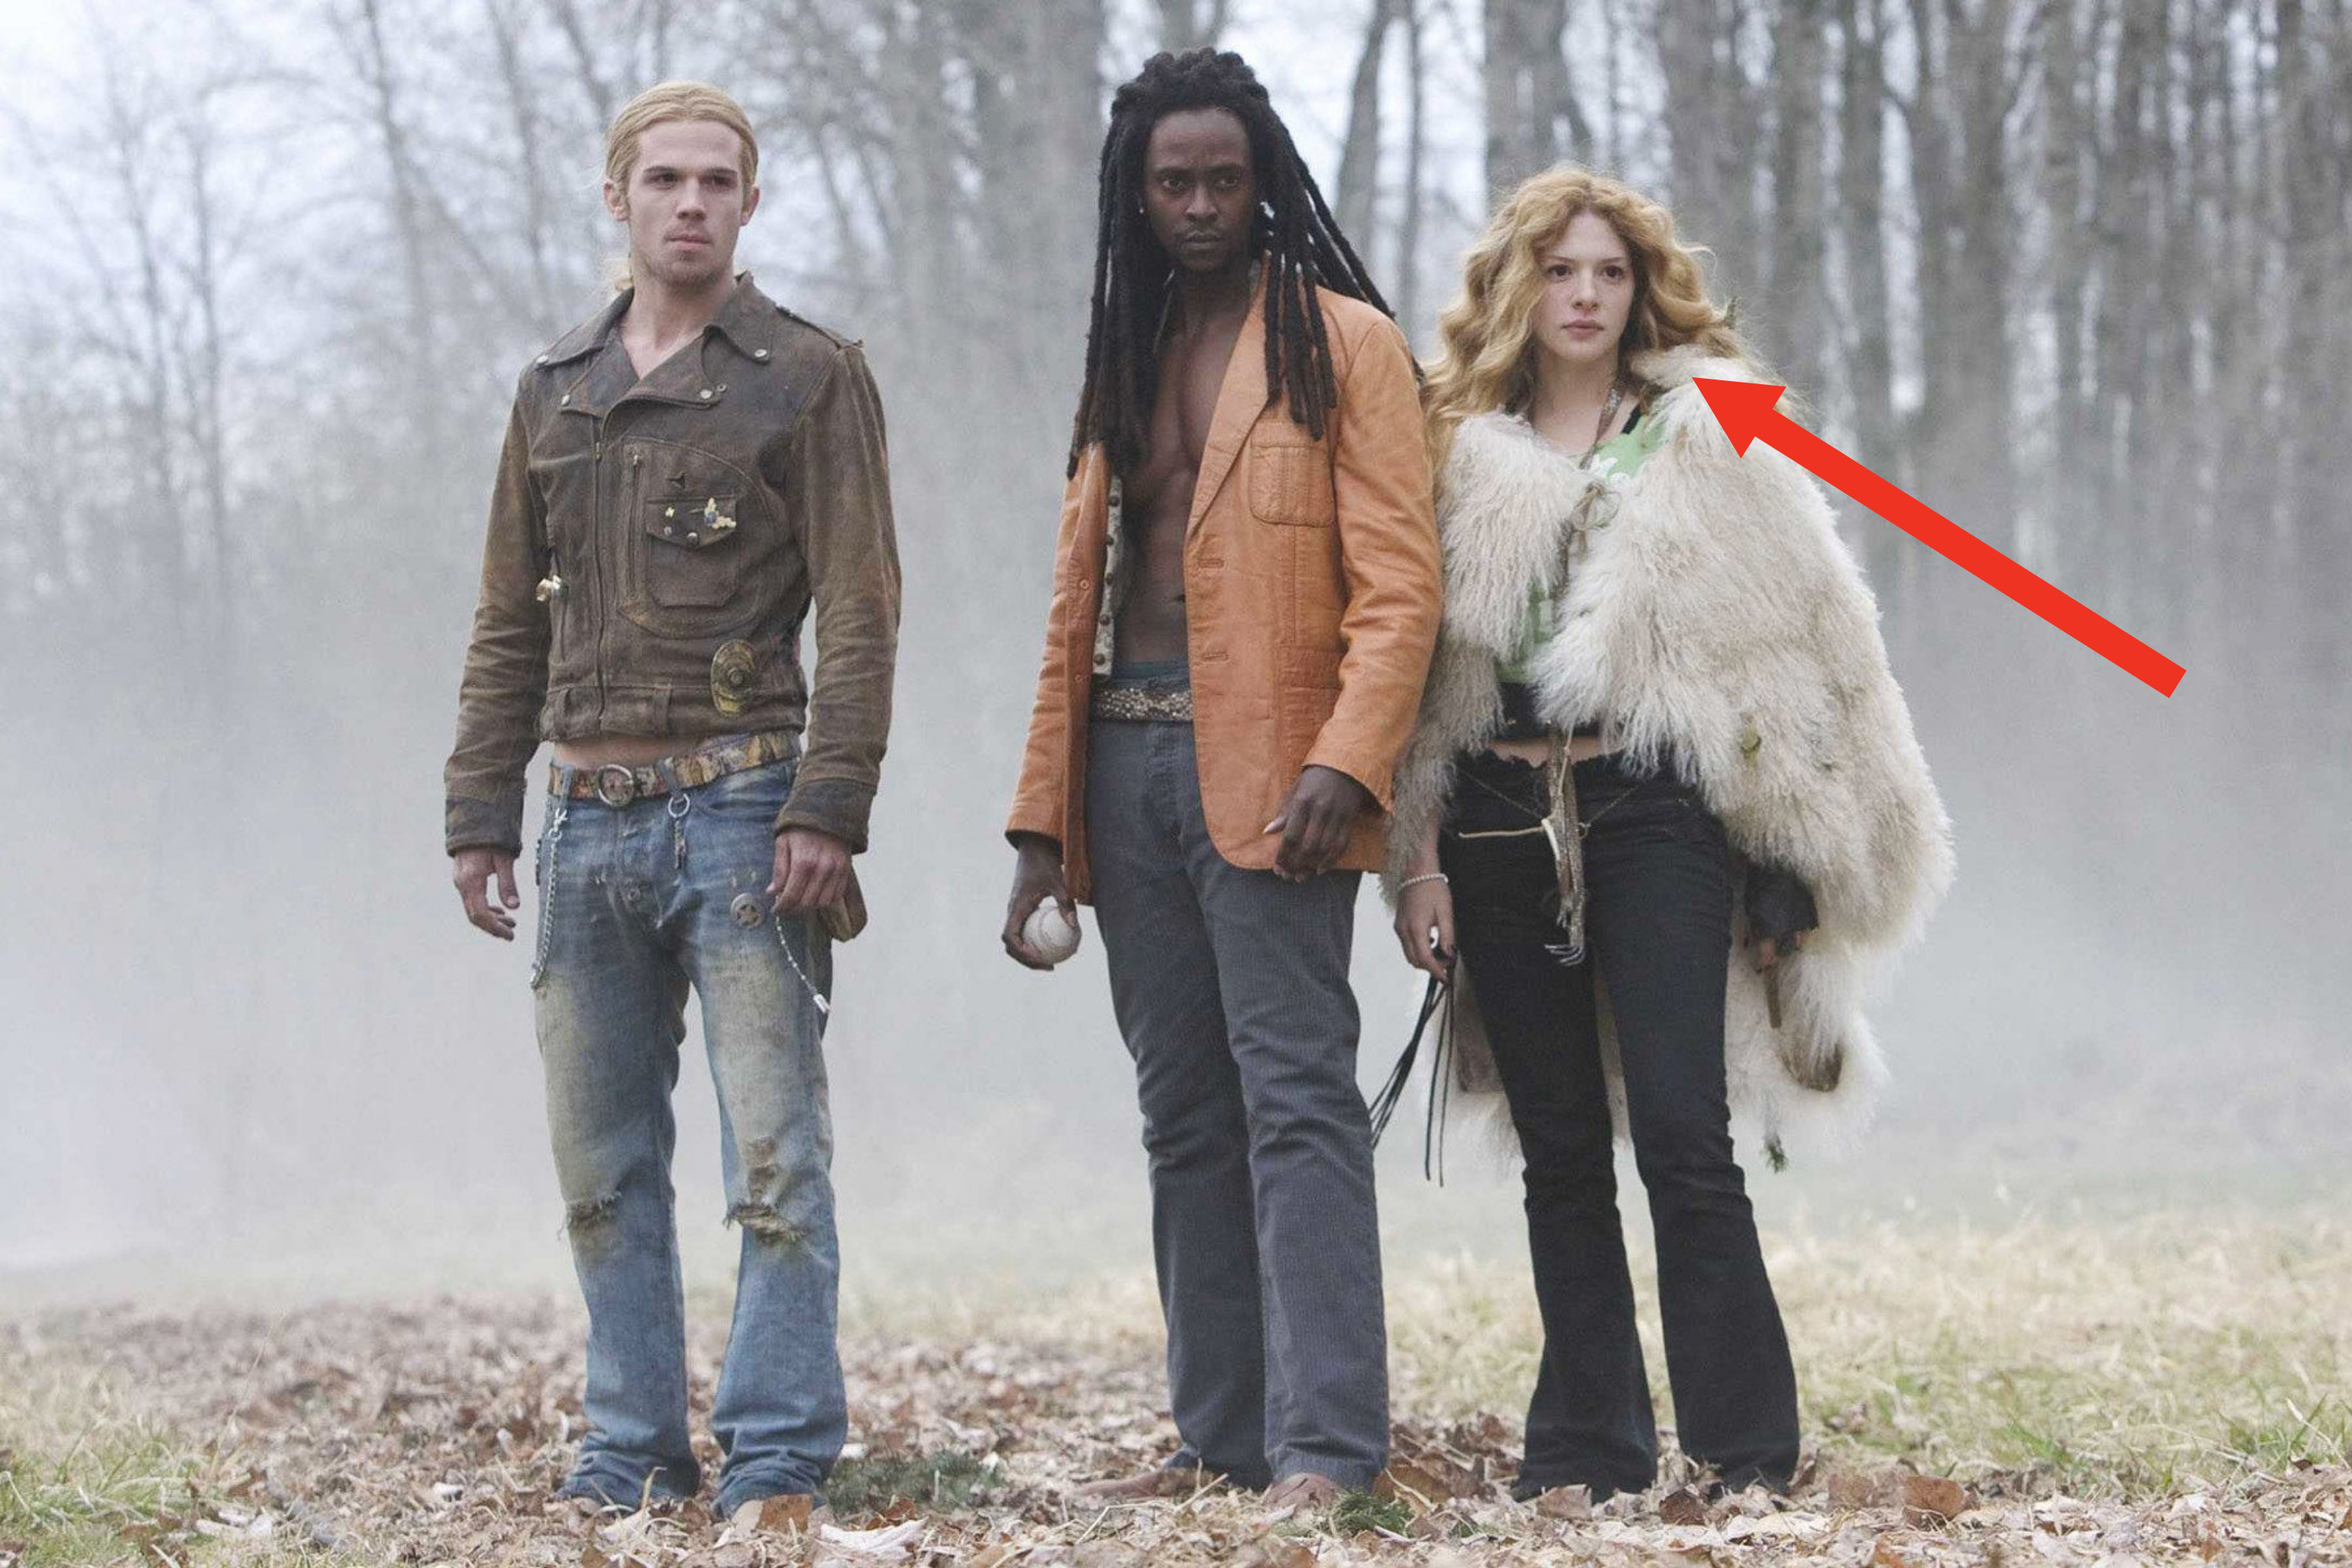 three vampires stand in a clearing with an arrow pointing to Rachelle